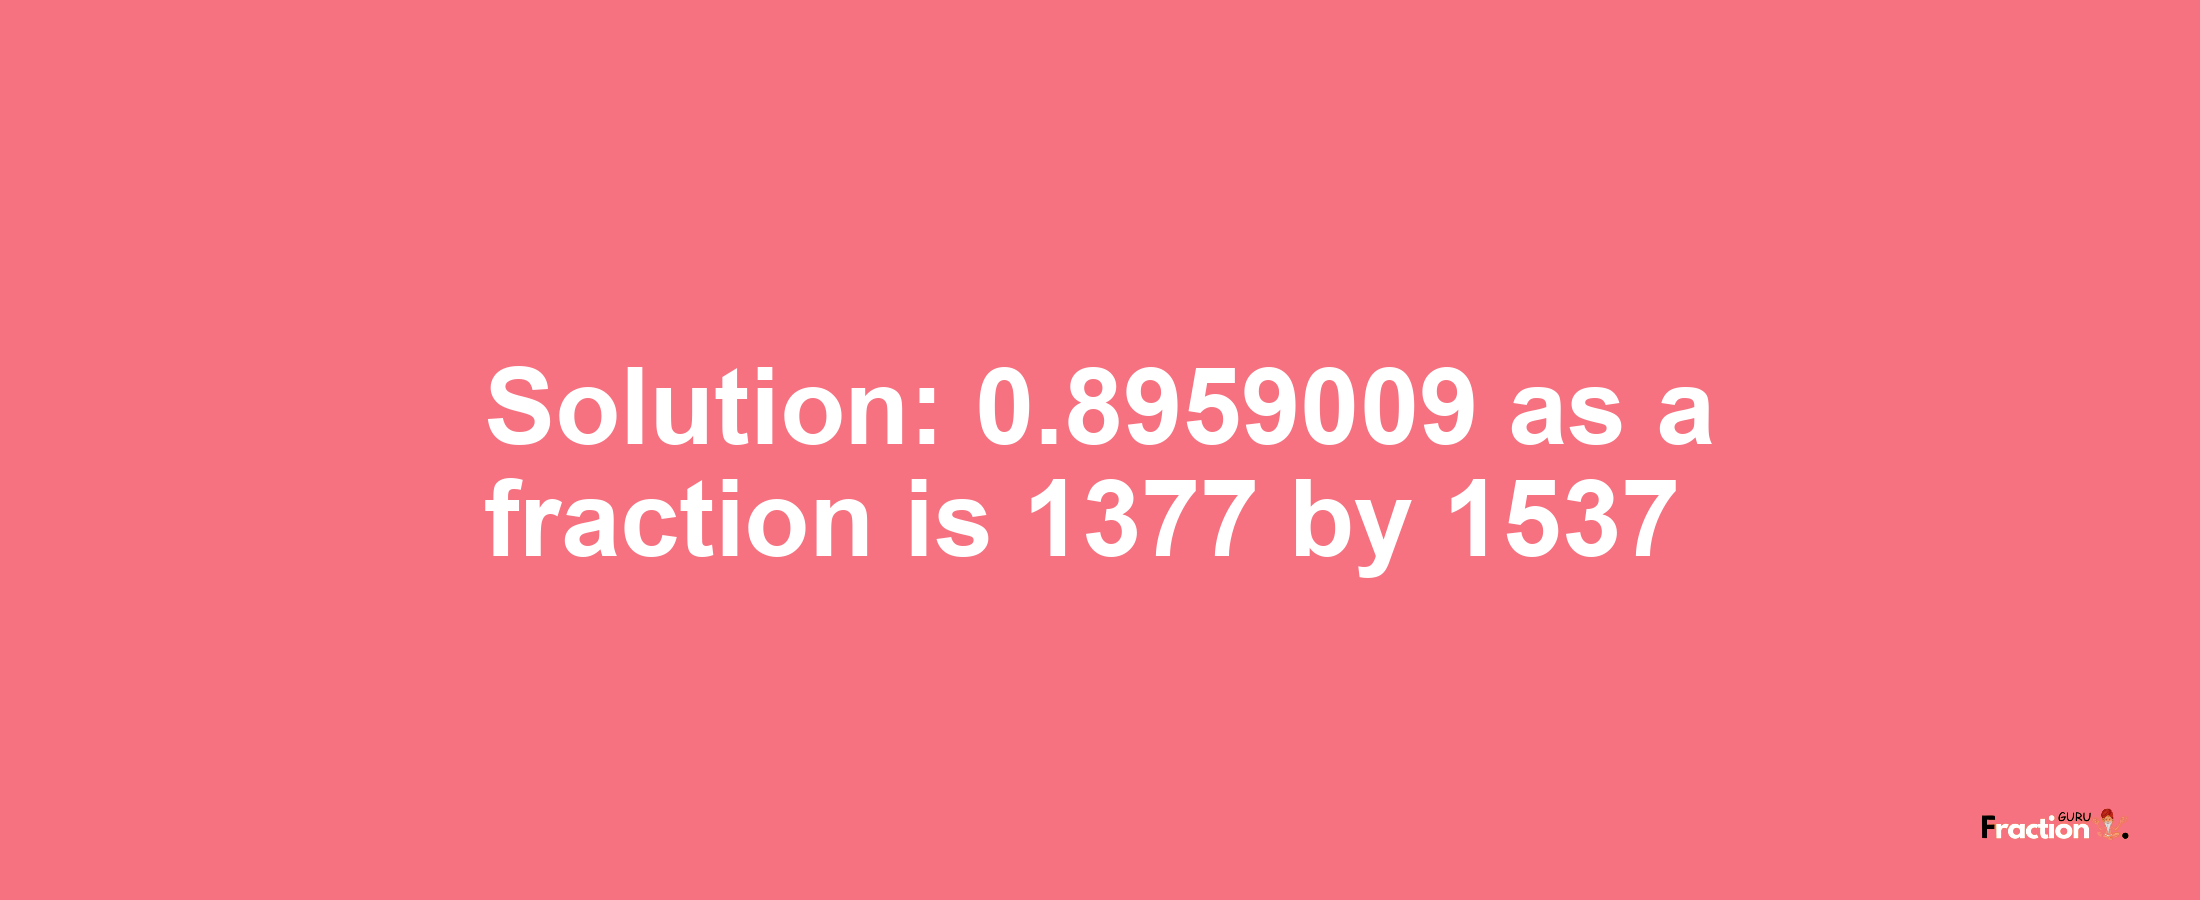 Solution:0.8959009 as a fraction is 1377/1537